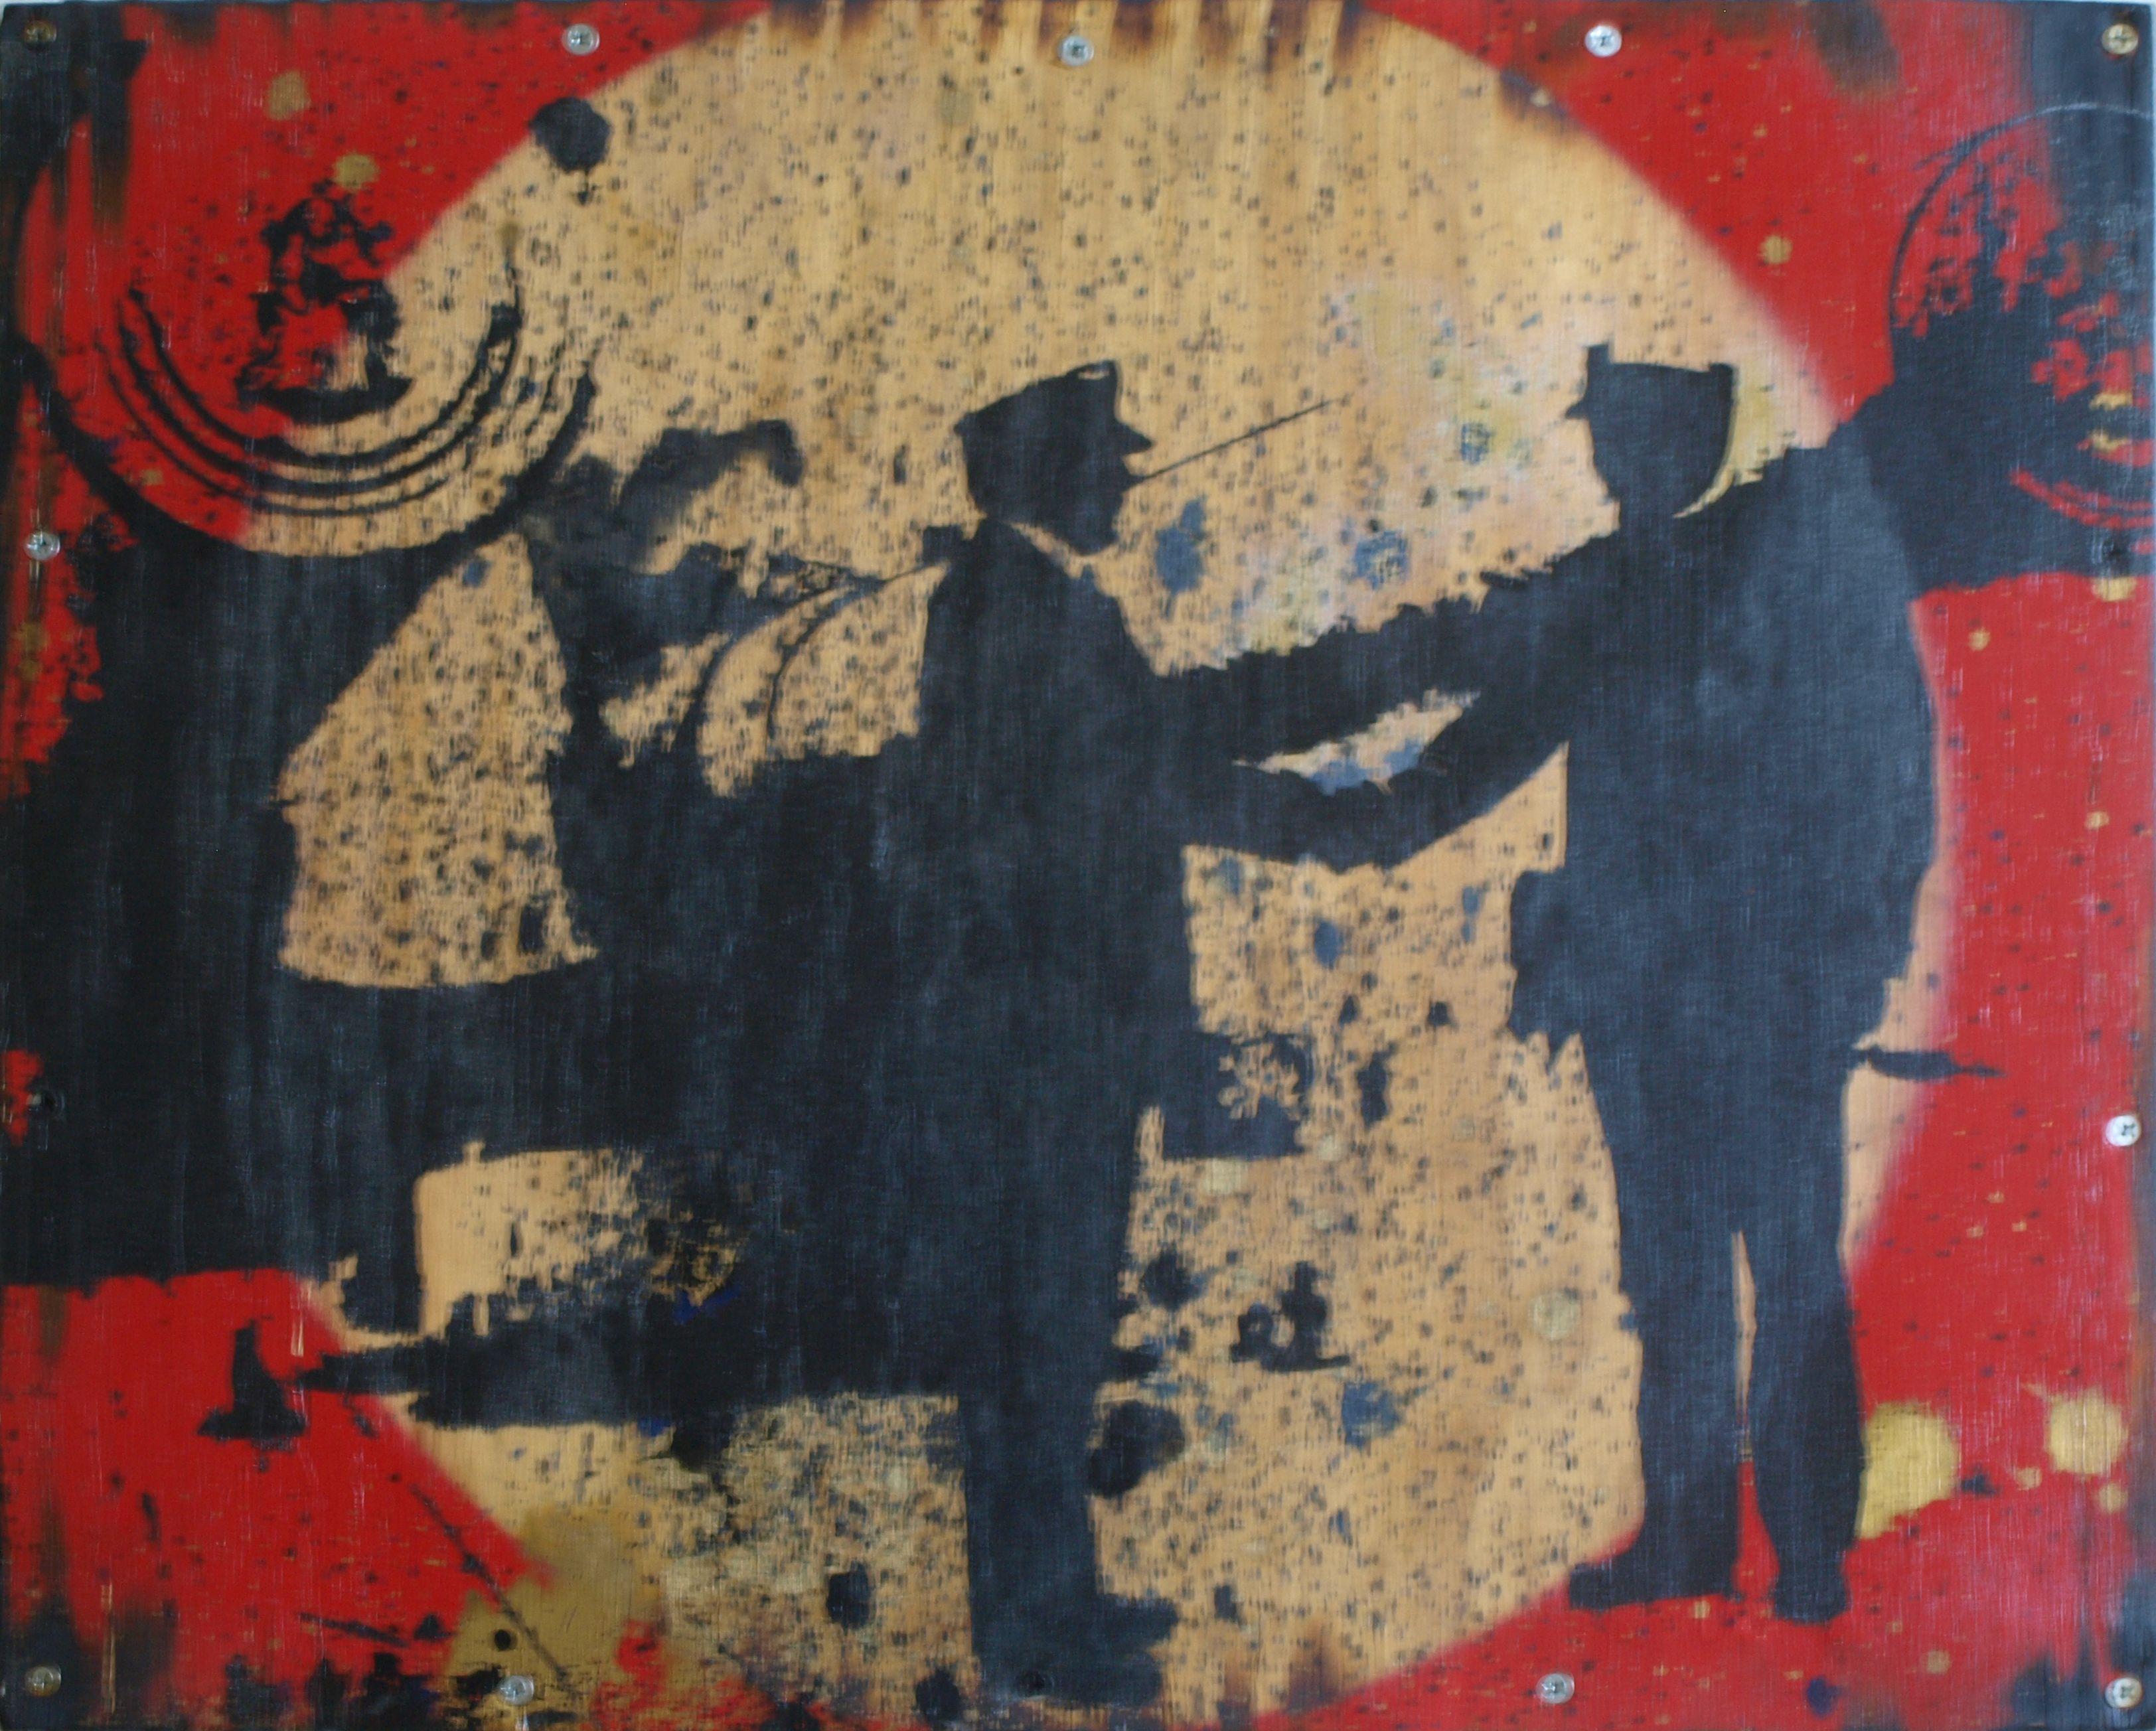 War Mongers the start of my stenciling art career. This was a piece of wood that was spray painted accidentally from a sign we were painting red, it looked like the inverted Japanese flag. Found the photo of the signing of the surrender of the